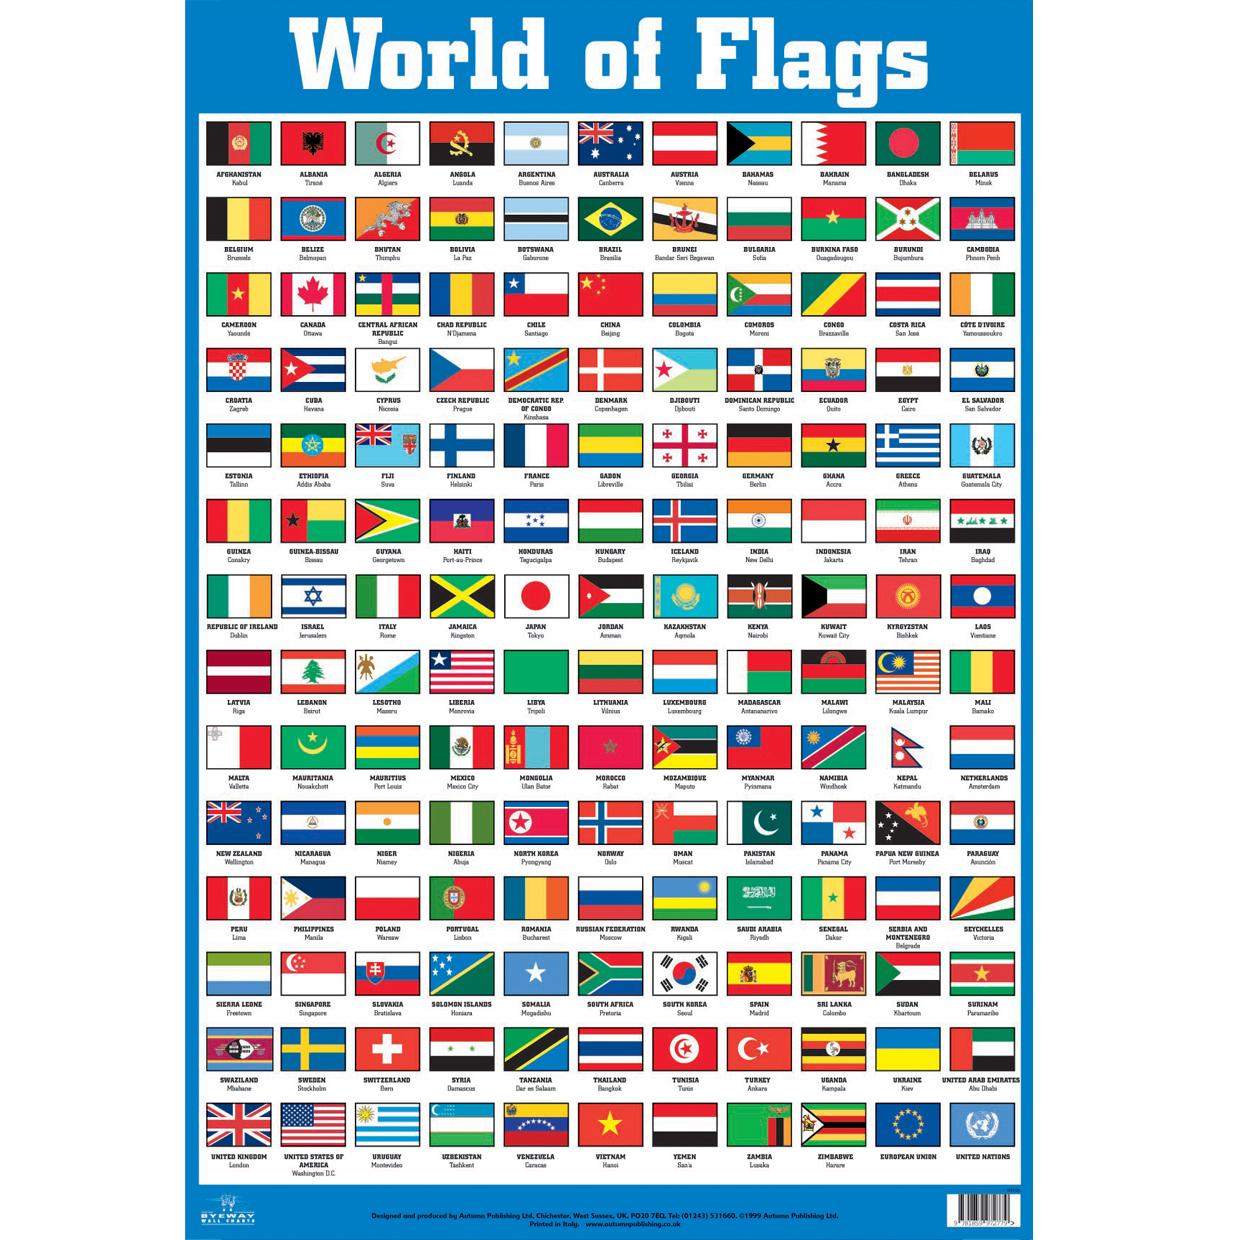 flags-of-the-world-fotolip